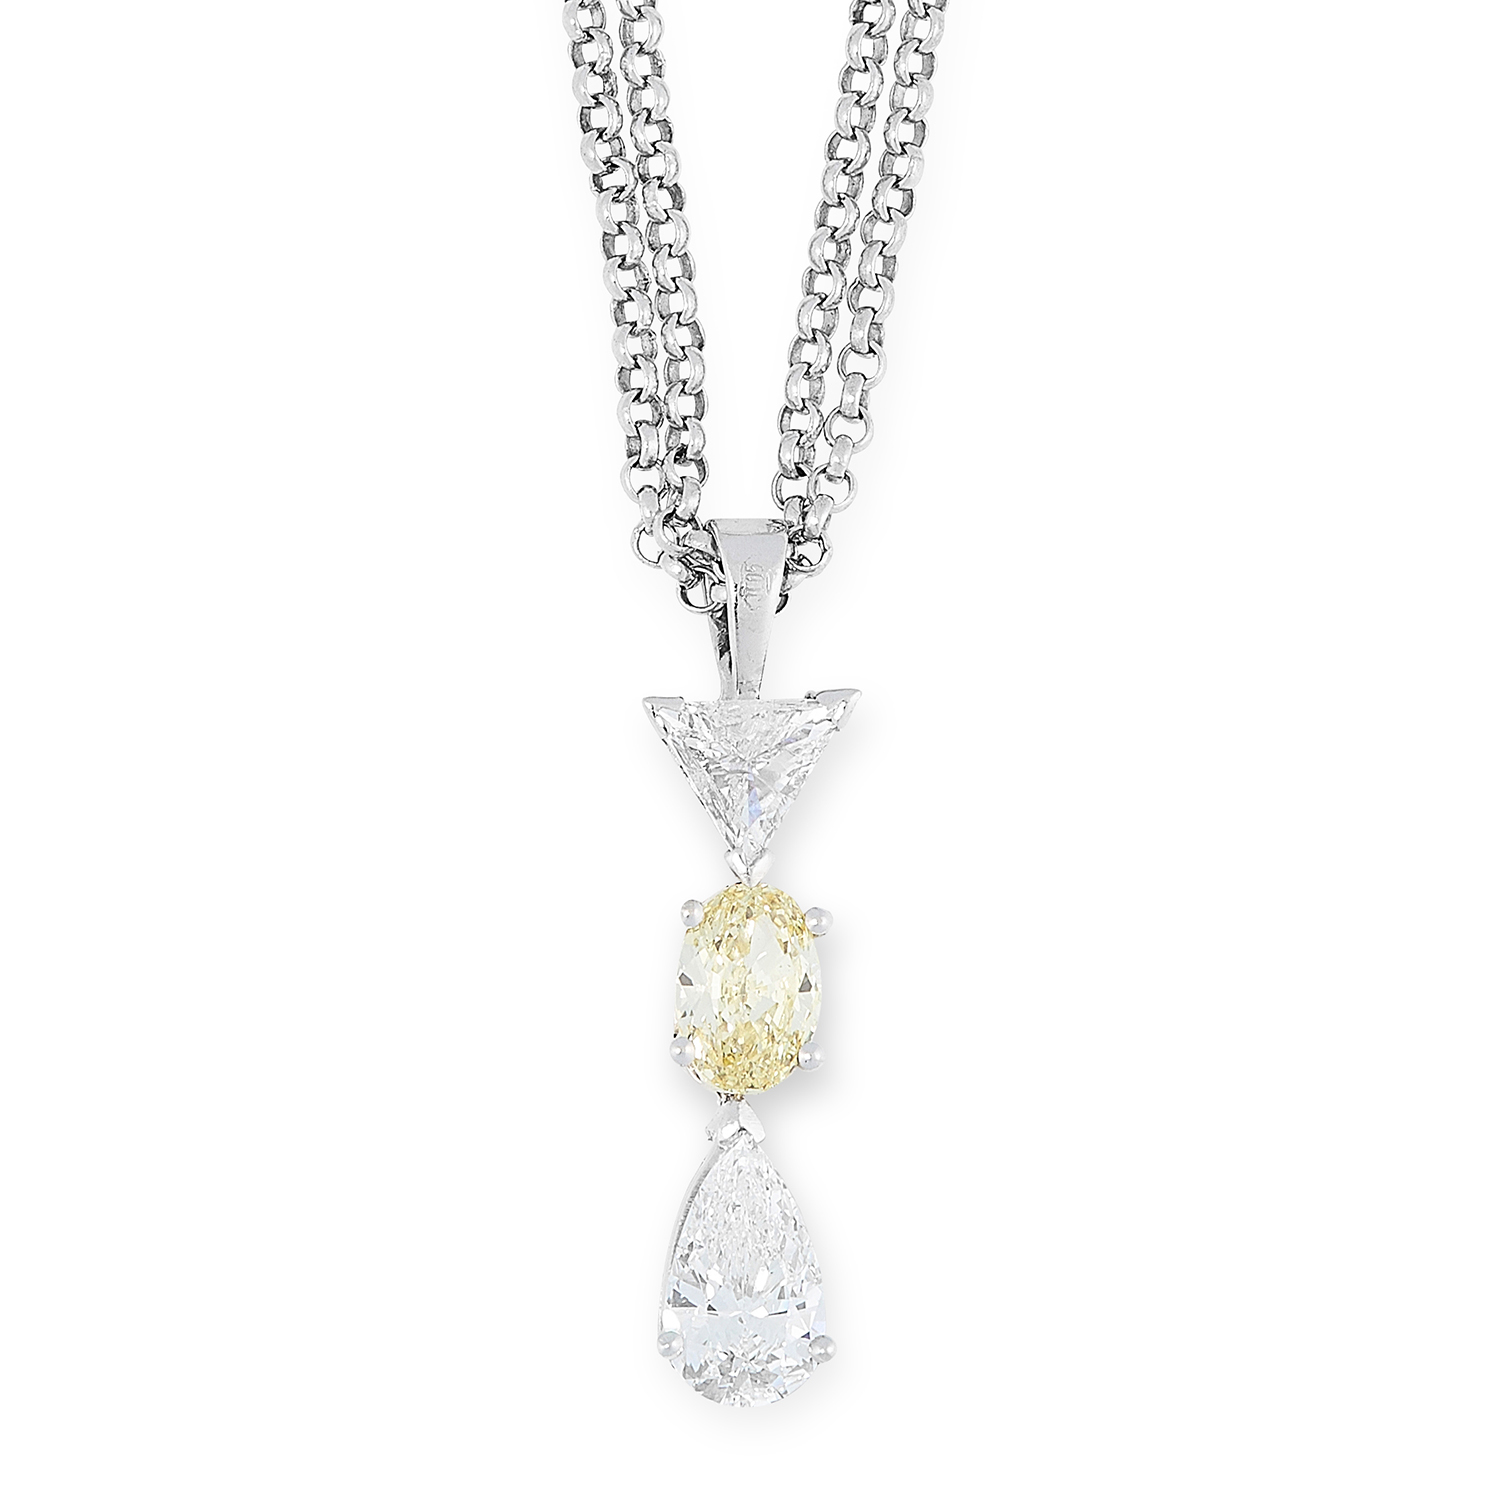 A FANCY YELLOW AND WHITE DIAMOND PENDANT, CHAIN AND EARRINGS SUITE the pendant set with a pear cut